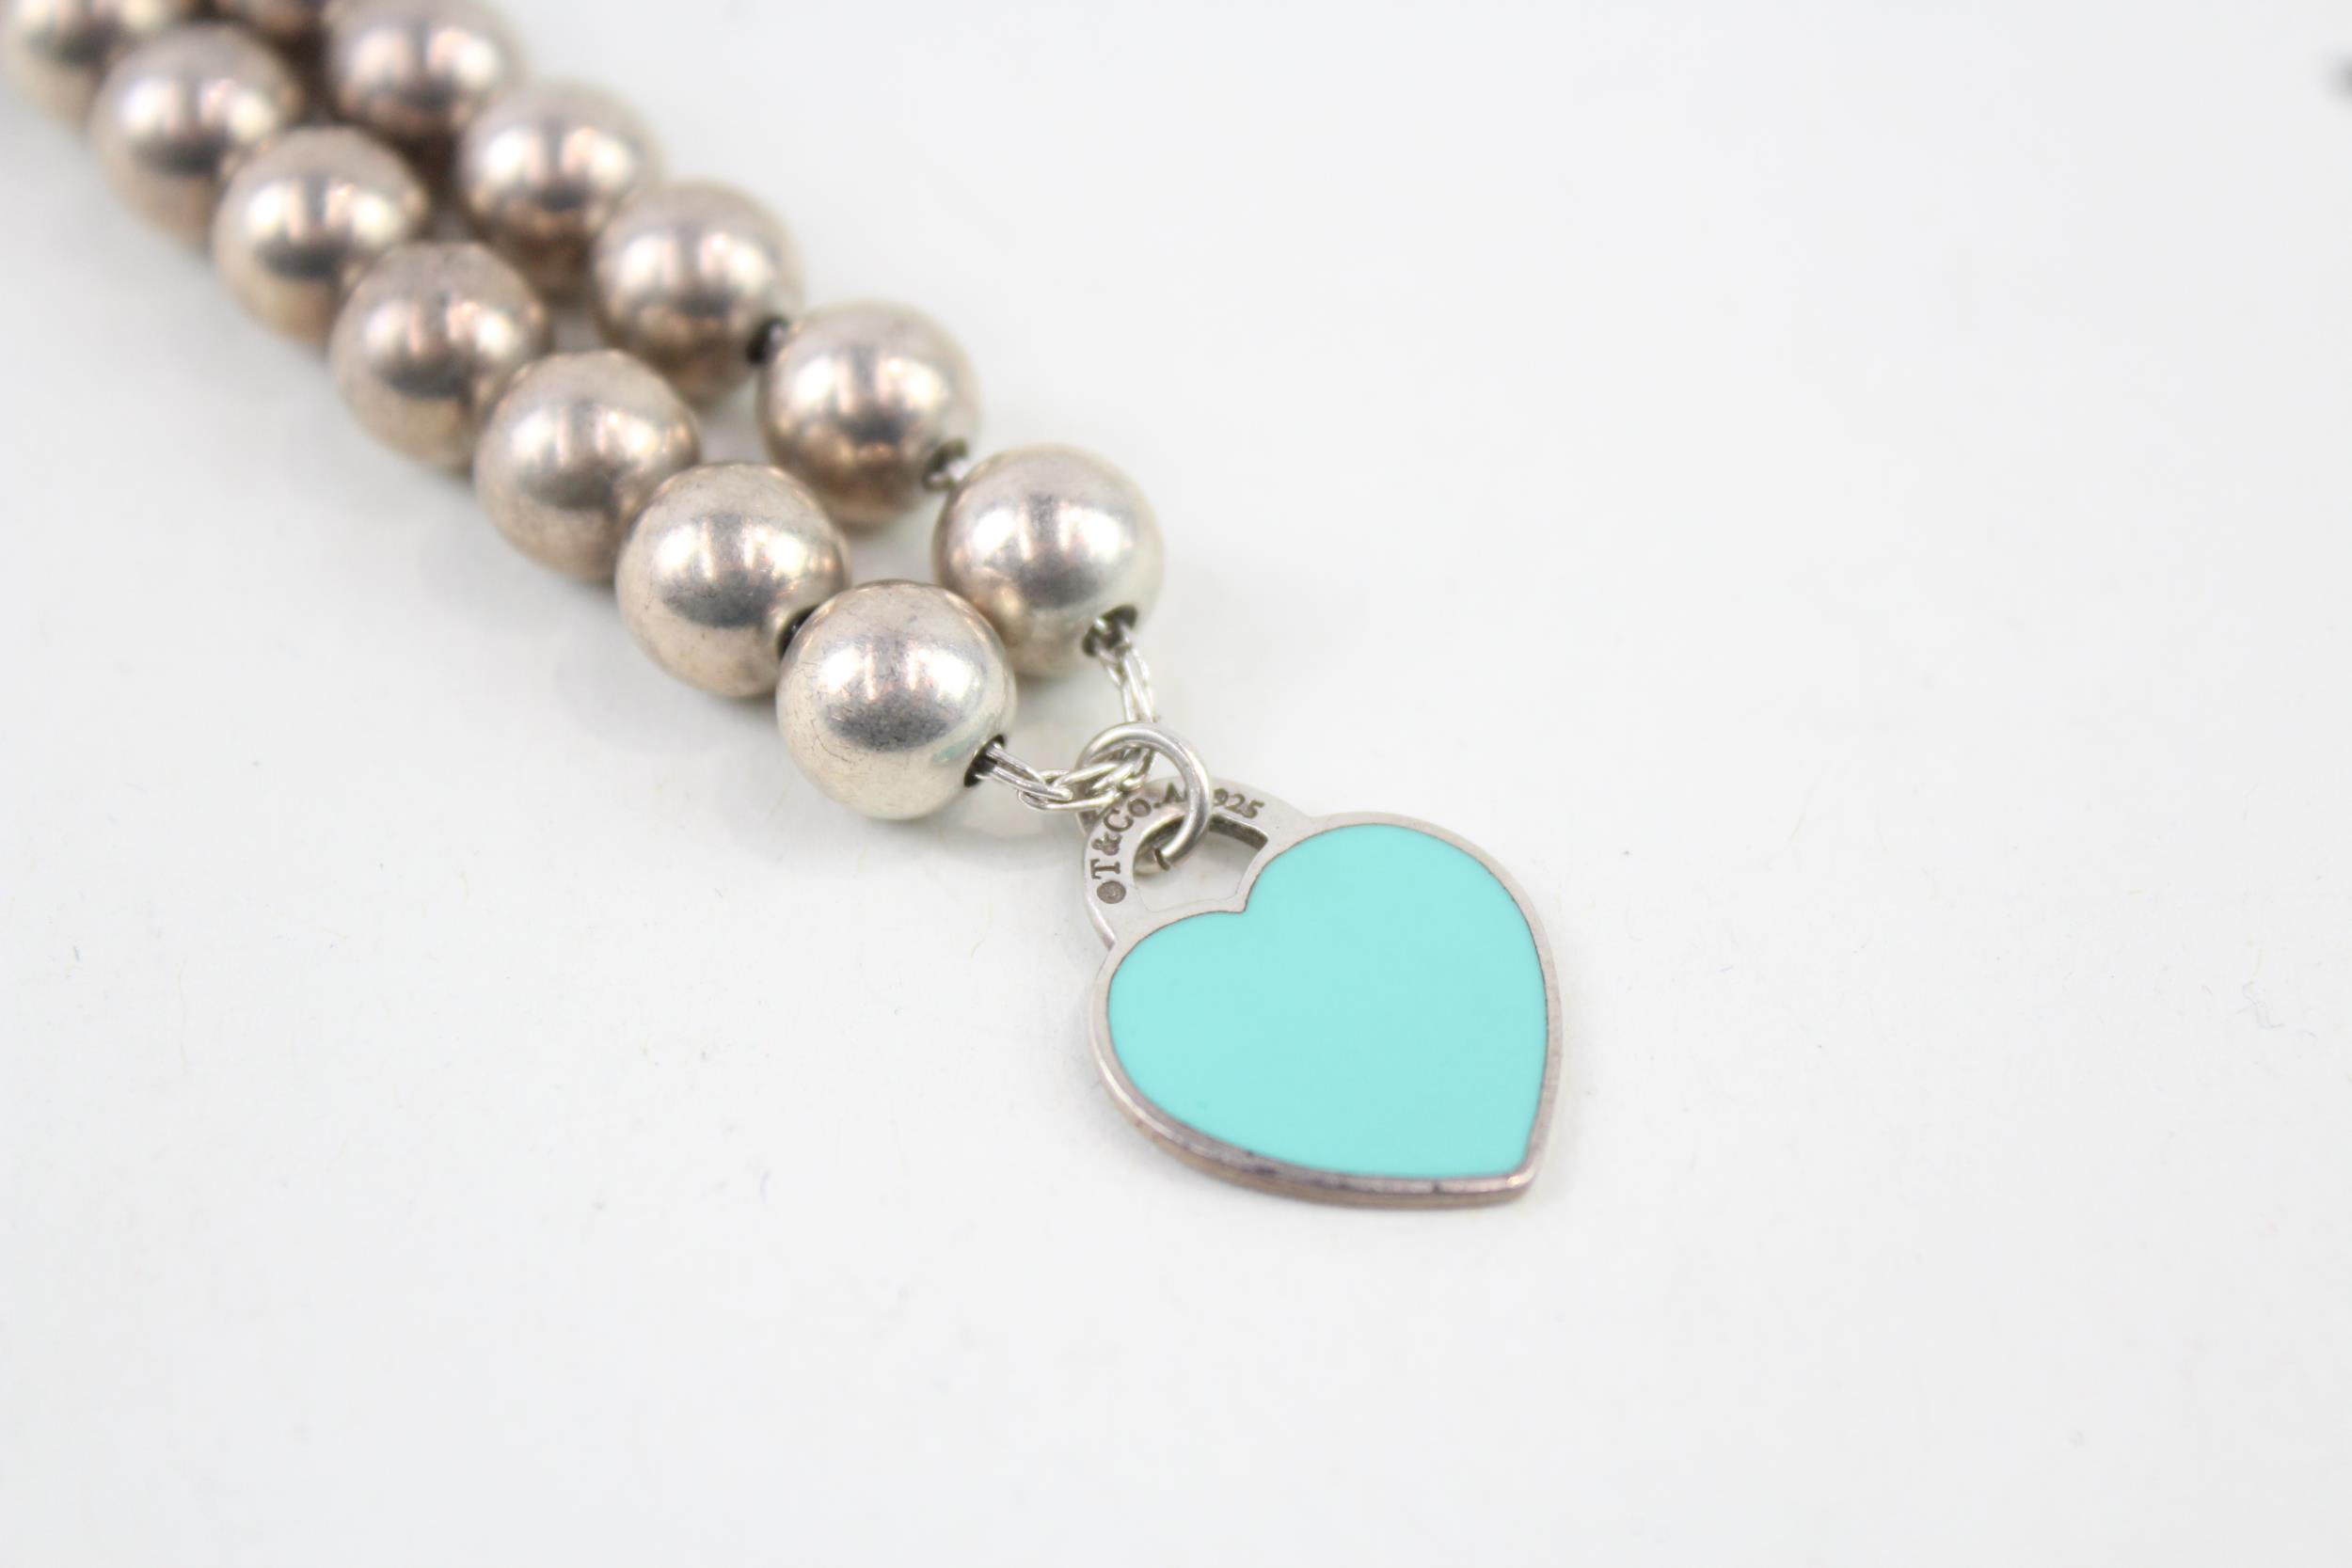 Silver bracelet with enamel heart charm by designer Tiffany & Co (16g) - Image 3 of 5